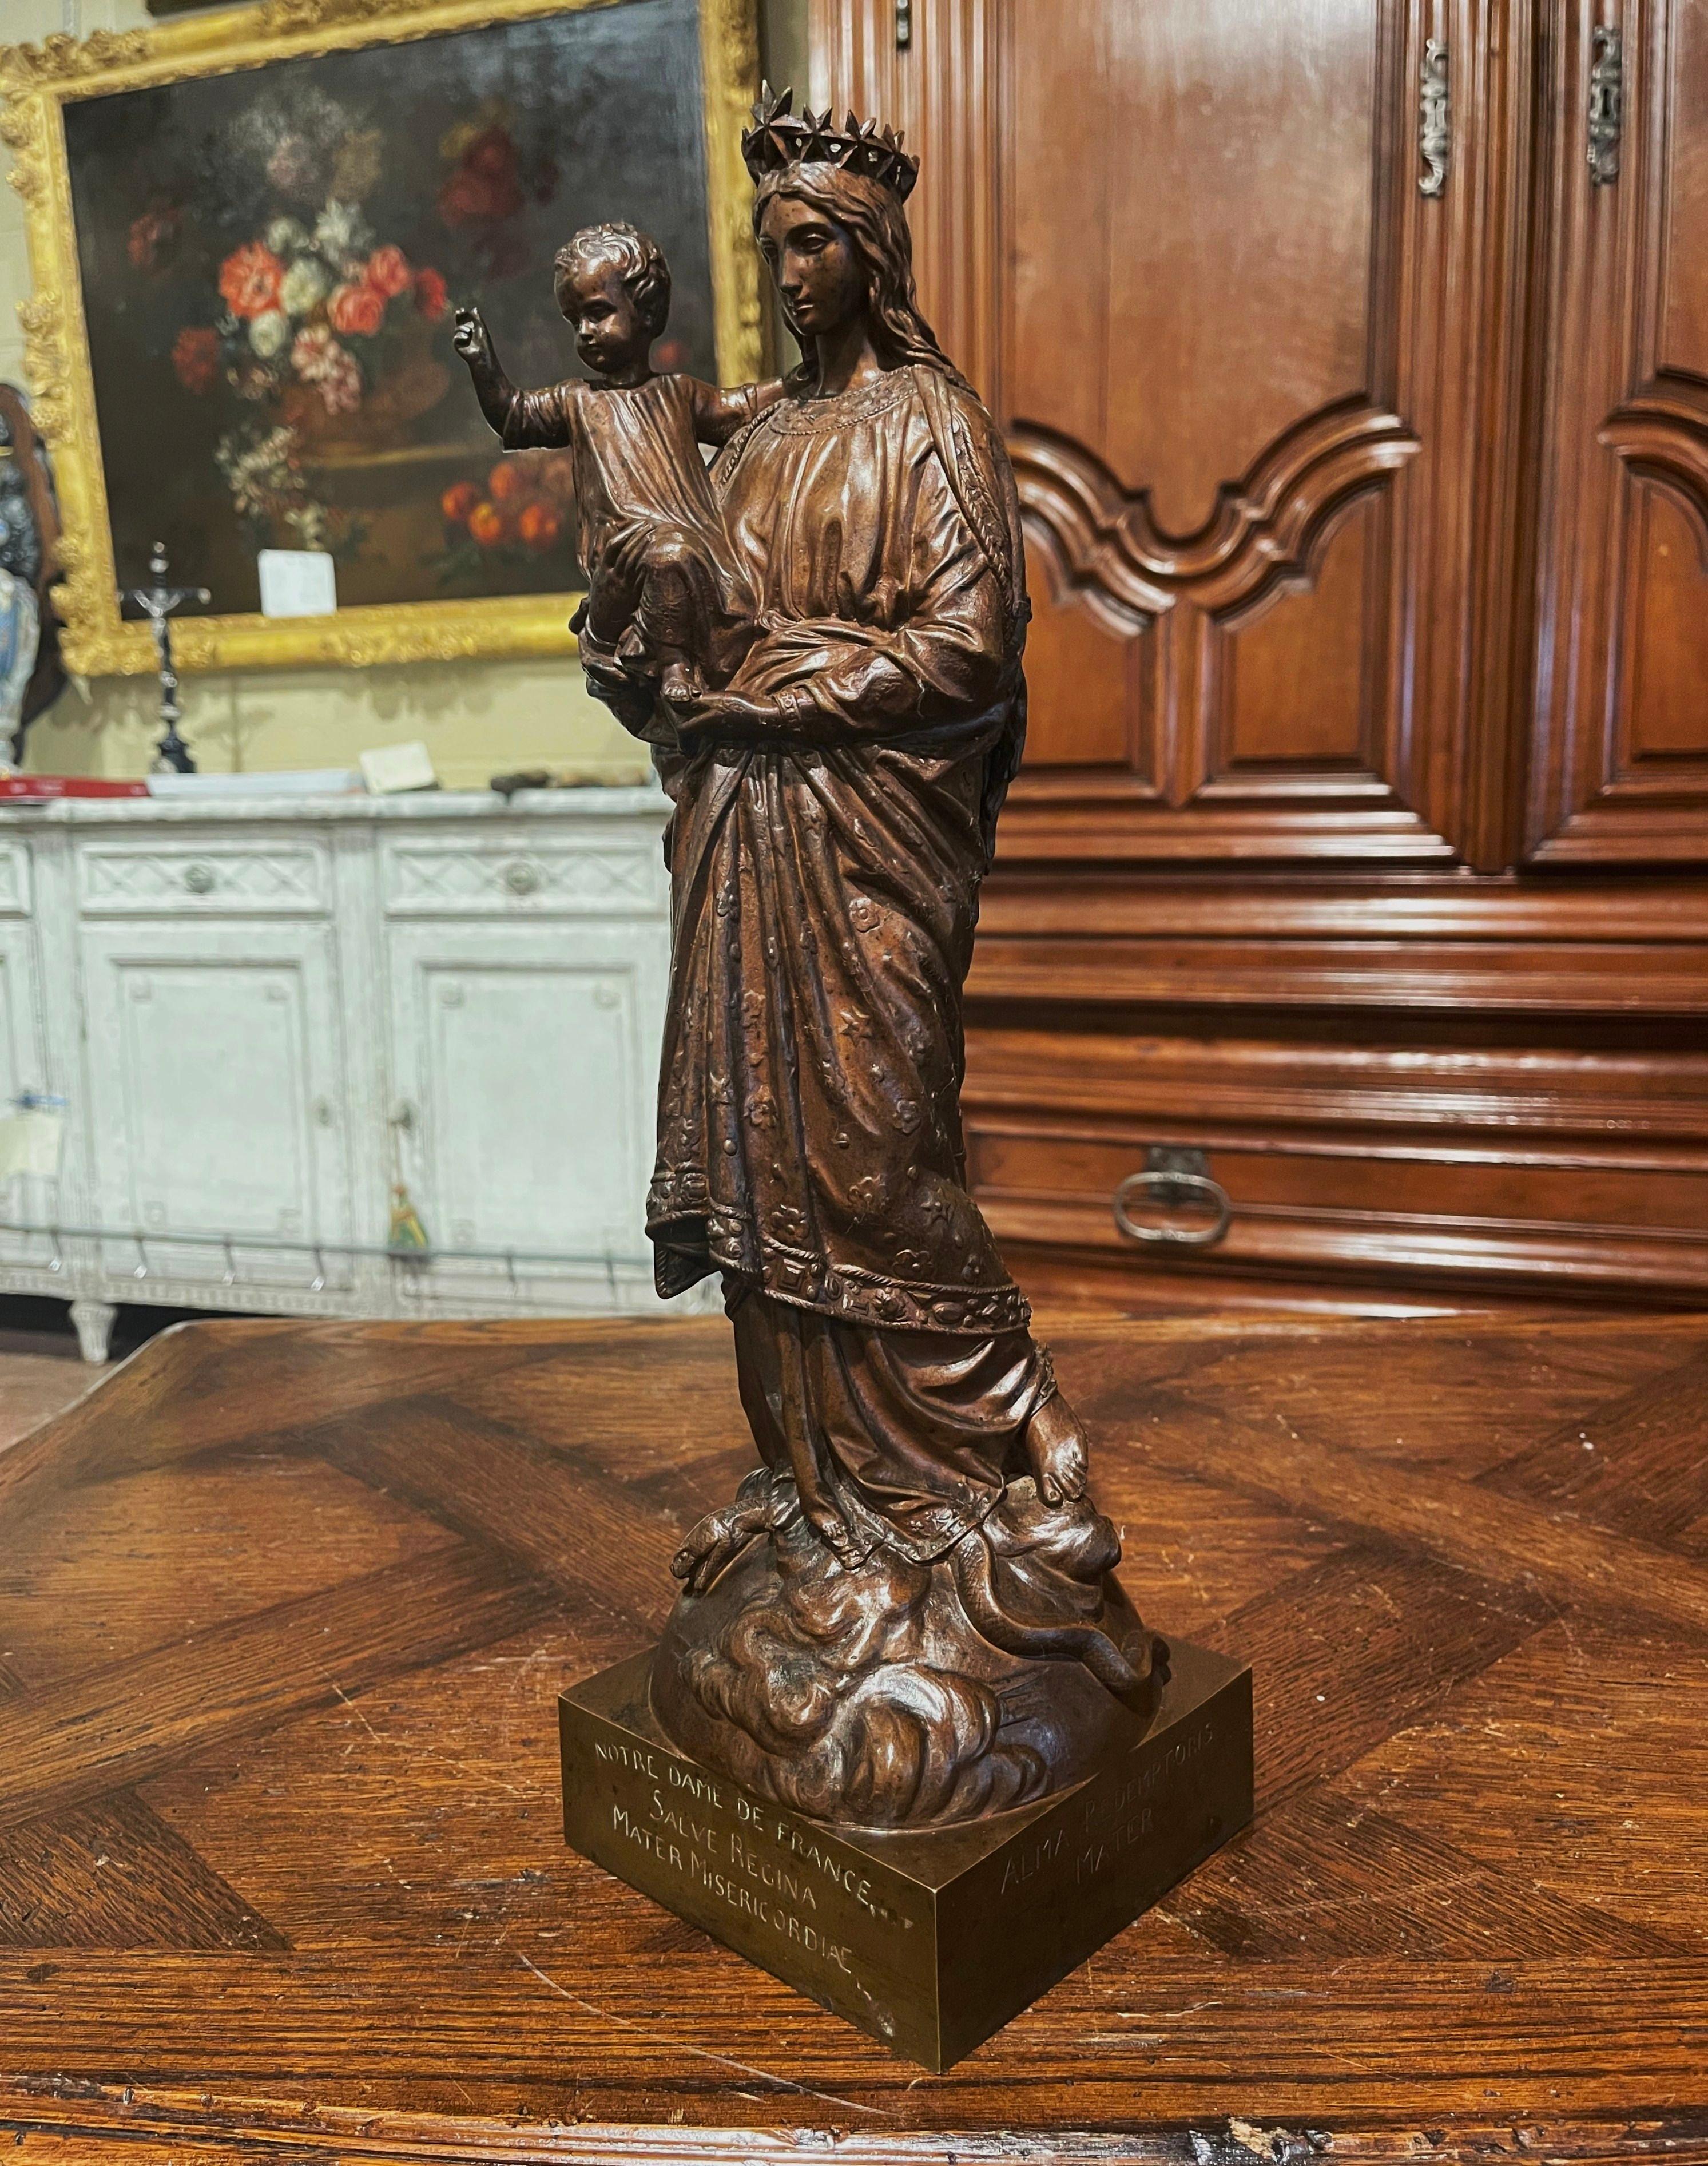 This elegant antique statue of the Virgin Mary and her Son, found in a chapel, was carved in Southern France, circa 1870. The large alluring bronze sculpture composition resting on a square base, features a crowned 